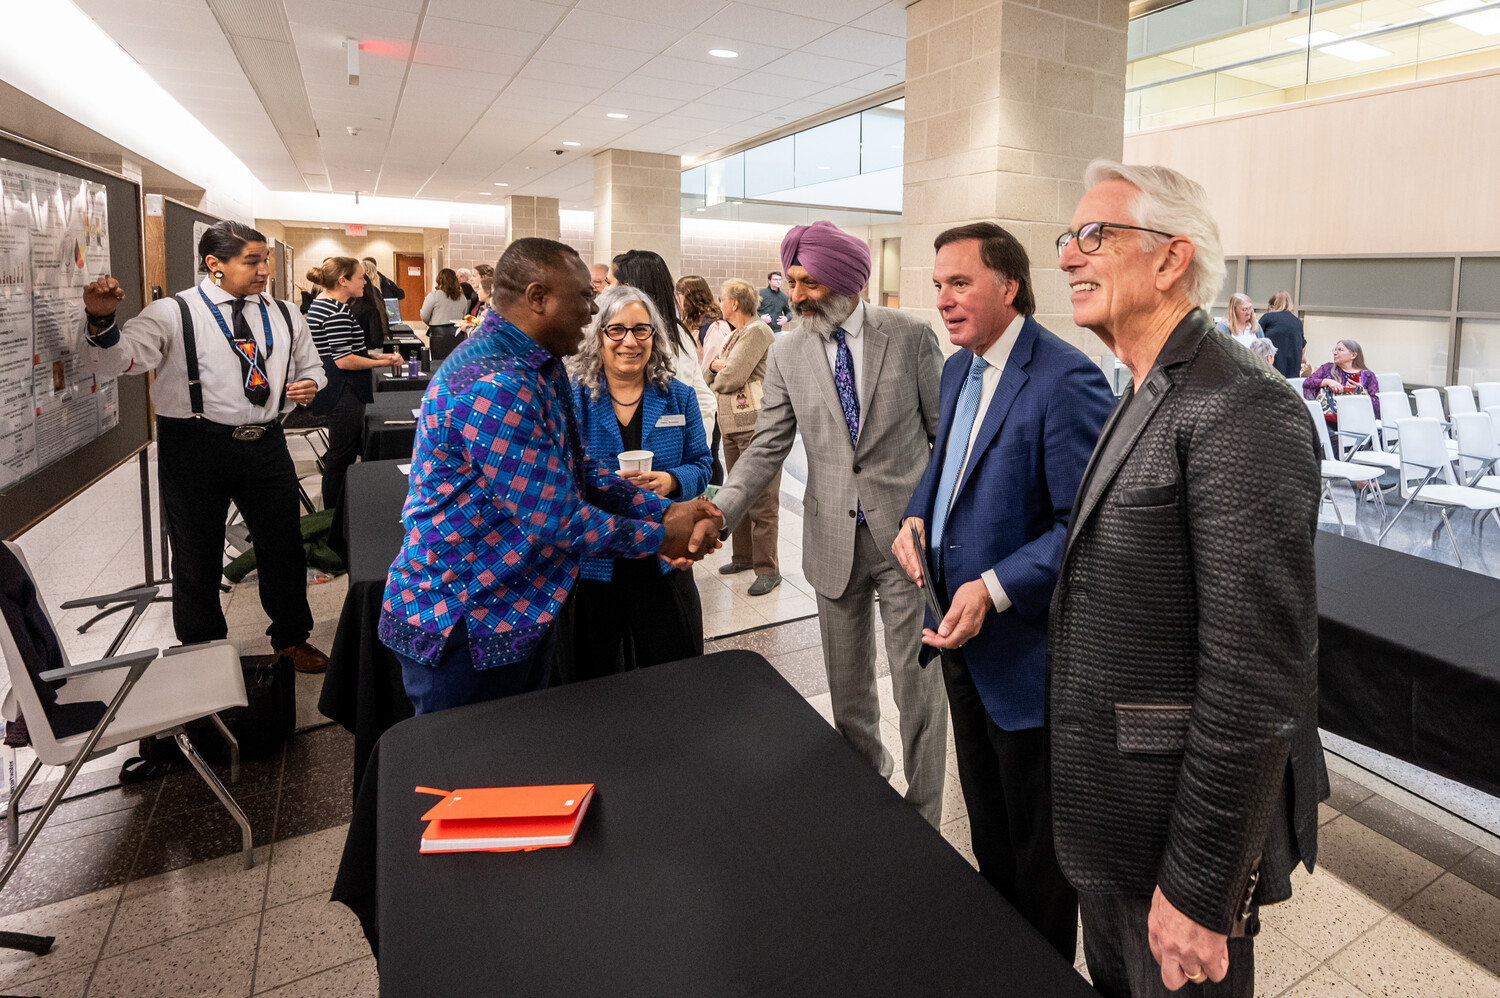 Pictured: CGPS Dean Debby Burshtyn, VP Research Baljit Singh, Hon. Gordon Wyant, and USask President Peter Stoicheff engage with research poster presentations. Photo credits: Matt Smith